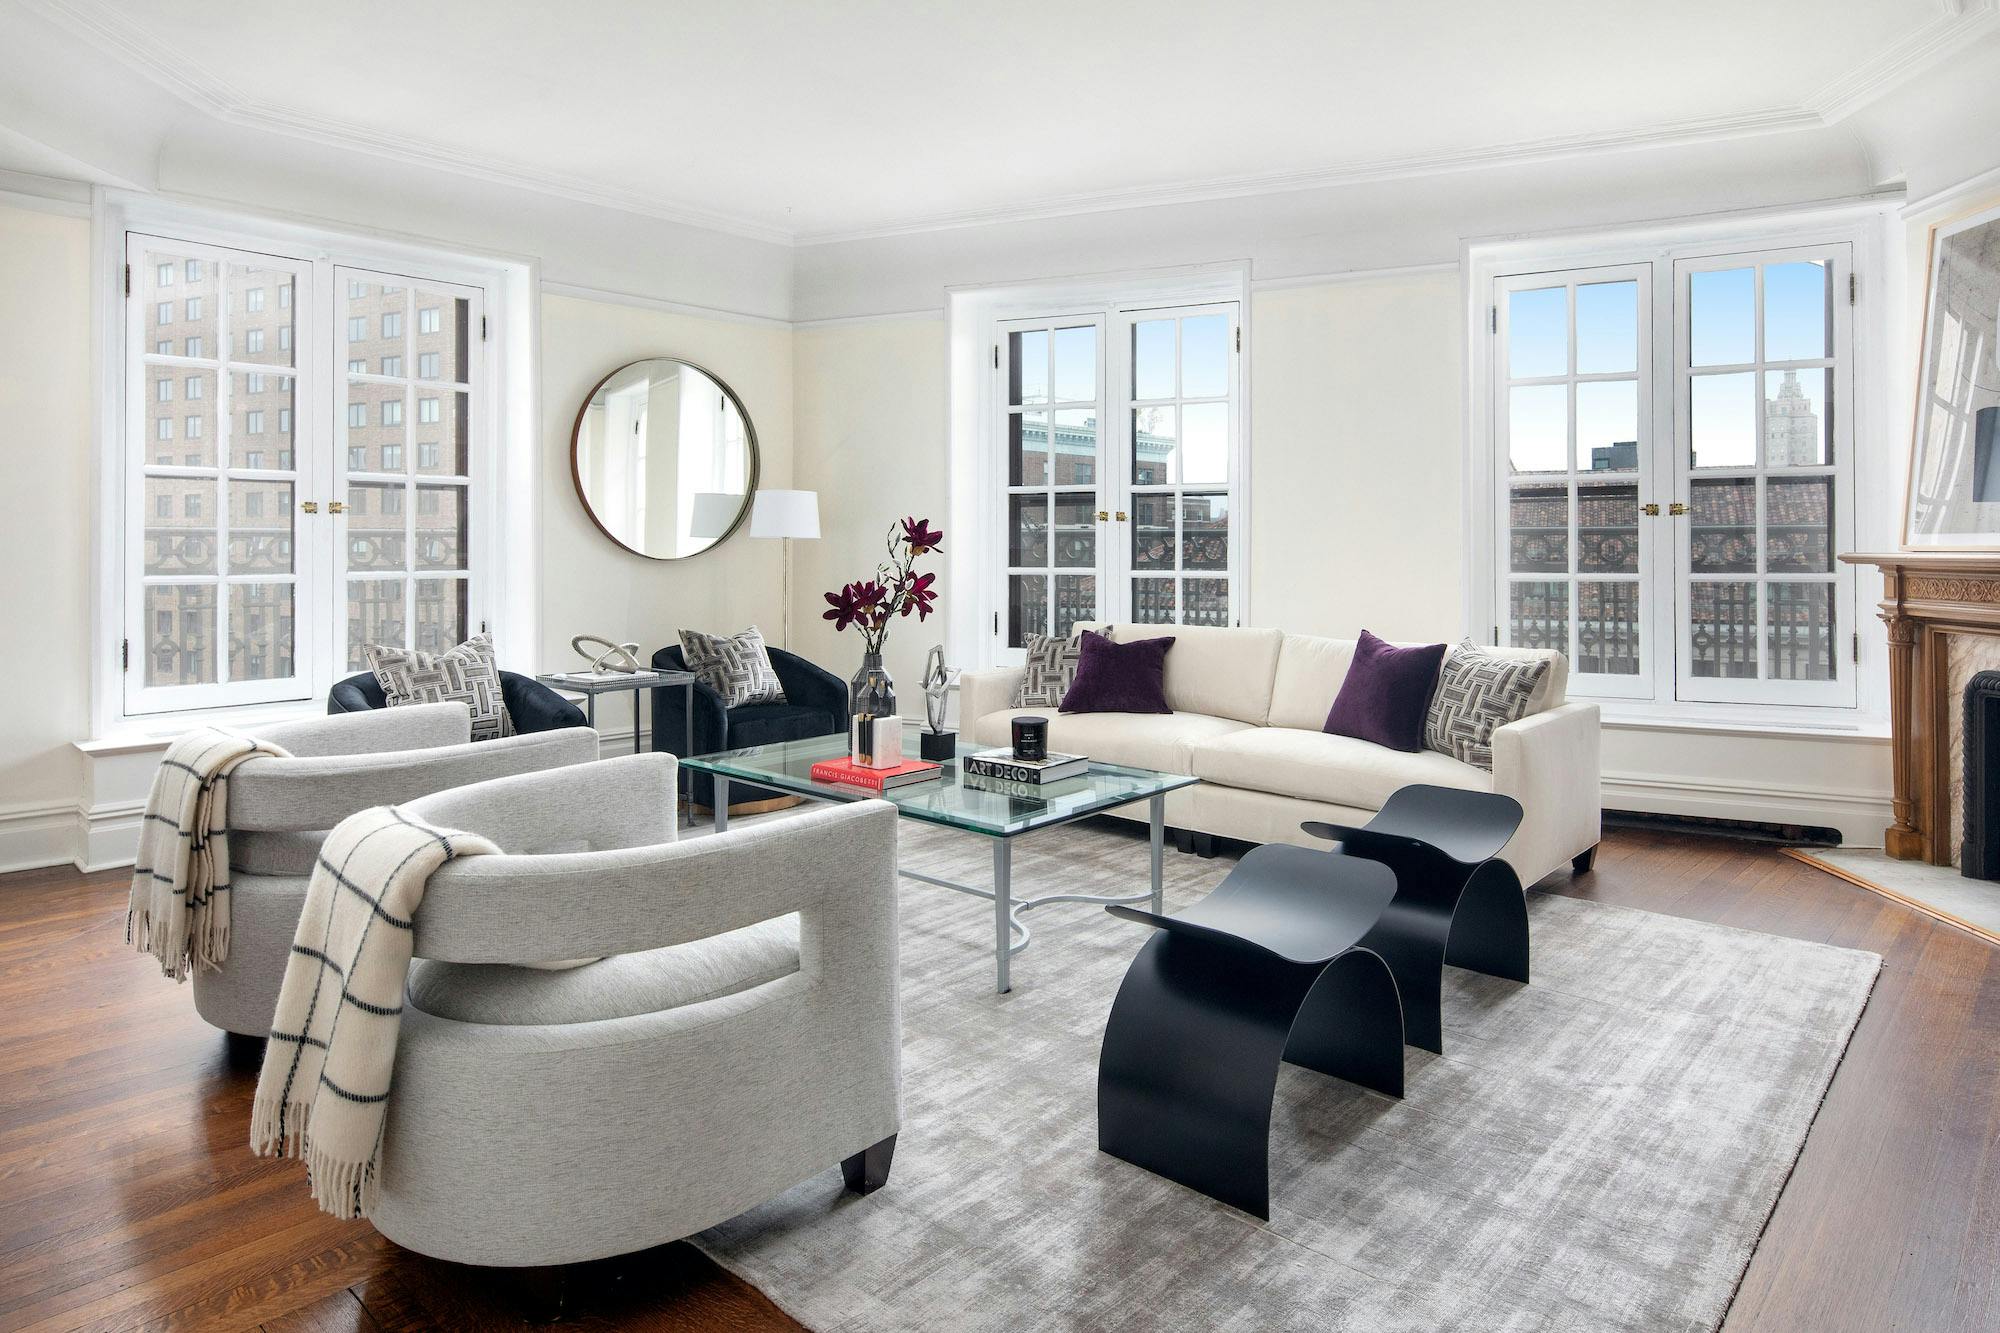 Meridith-Baer-Home-Home-Staging-New-York-The-Ansonia-Highrise-Condos-and-Lofts-Transitional-Living-Room